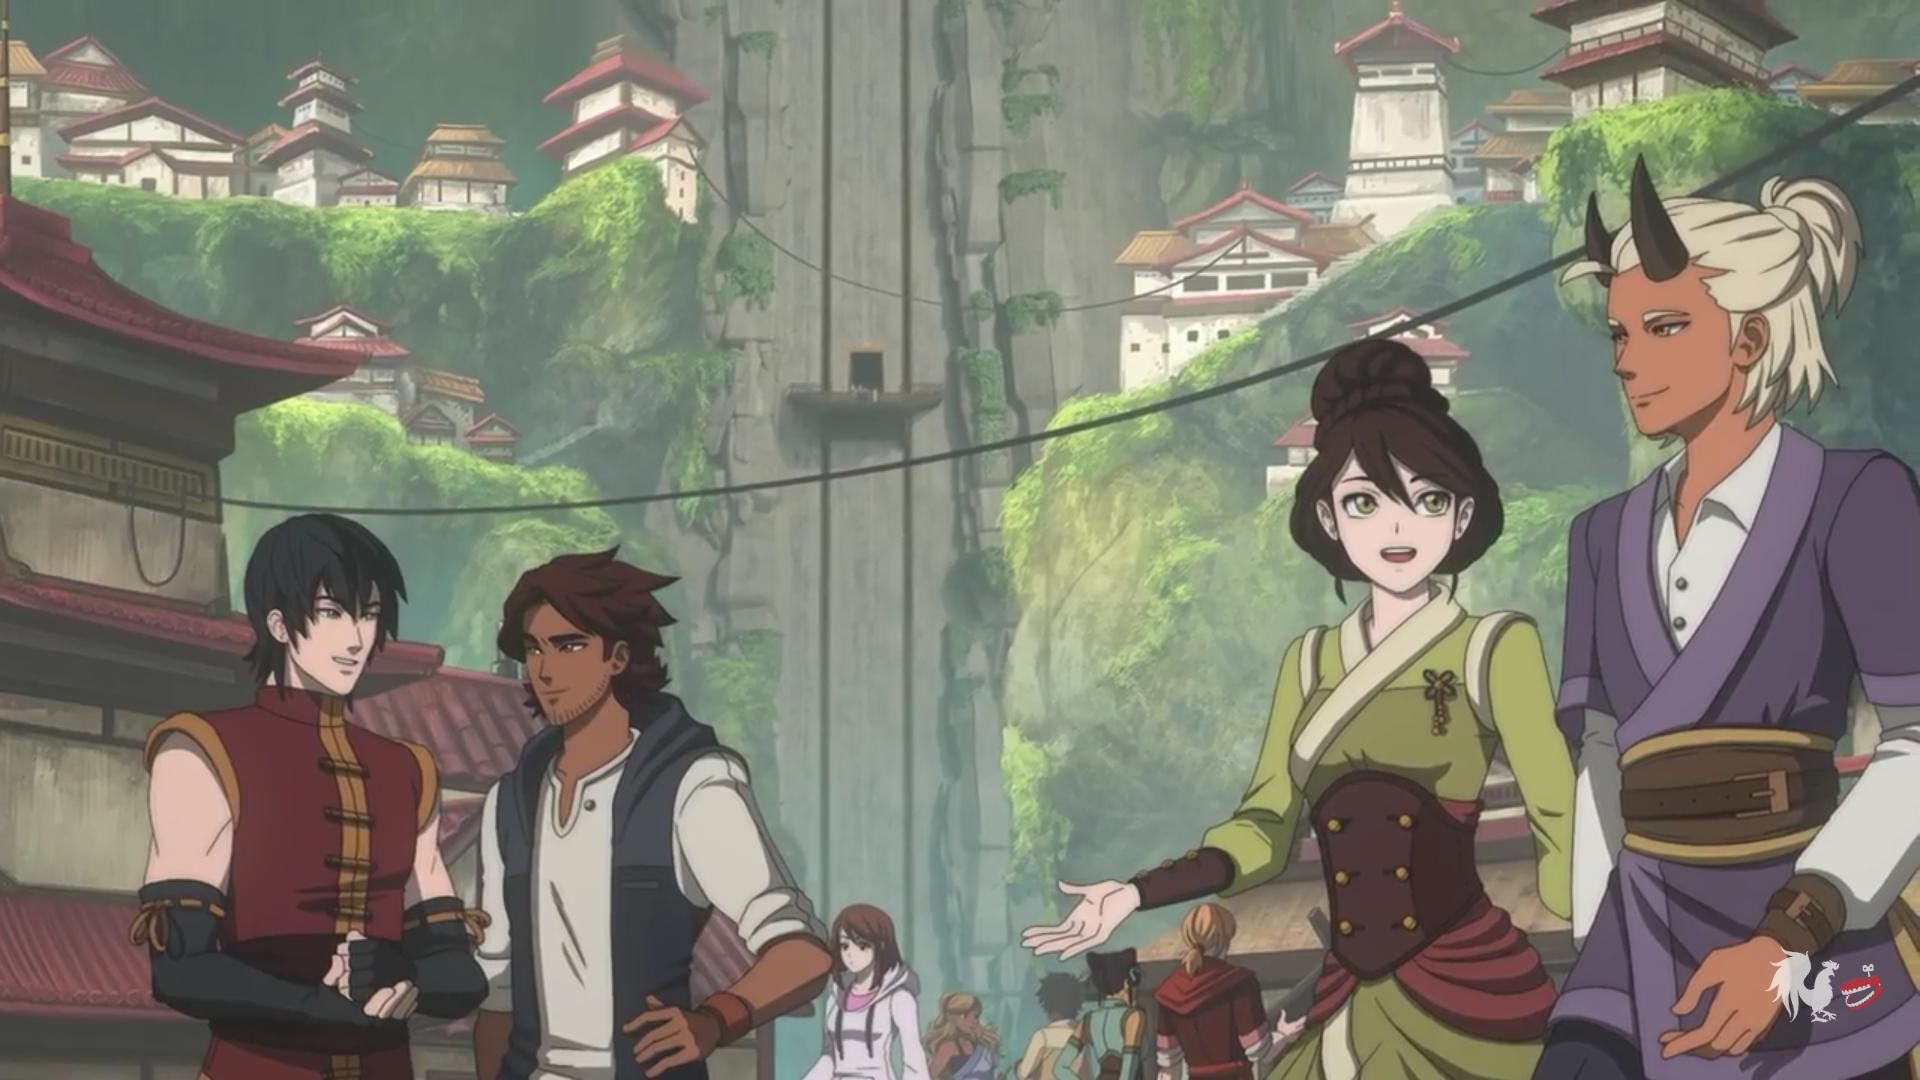 1920x1080 [ATLA] I think I found a Prince Zuko and Toph refrence in the latest  episode of RWBY